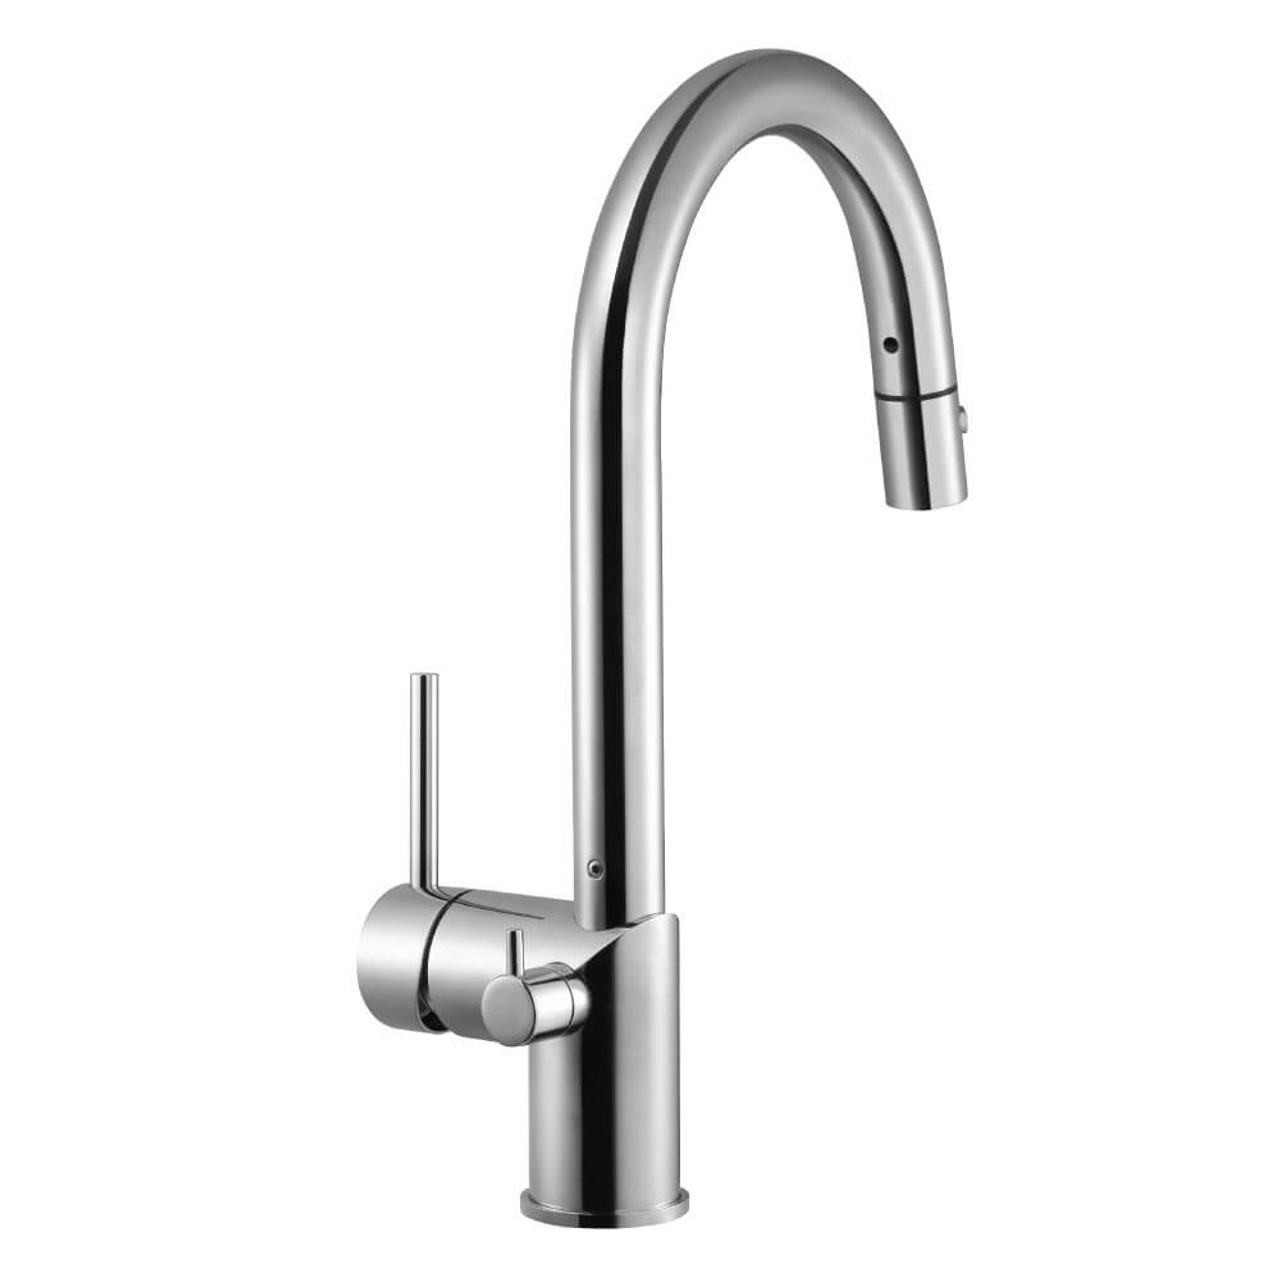 Deck Mounted 3 Hole Gooseneck Top Kitchen Faucet with Pull Down Spray | Watermark Designs